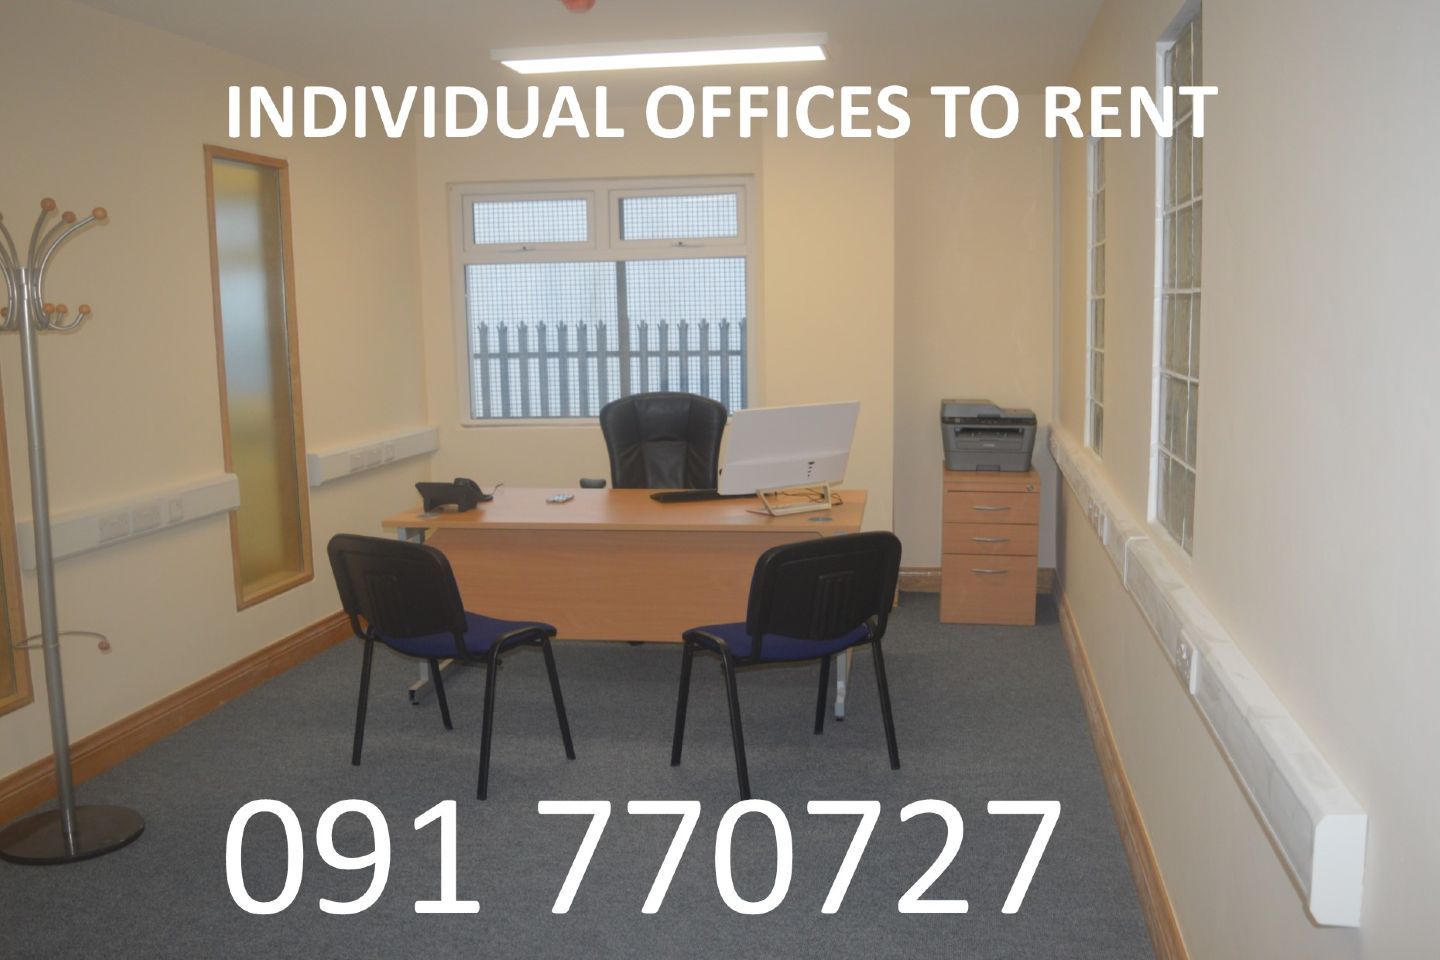 Aivilo House, Unit 16 Oldenway Business Park, Ballybane, Co. Galway